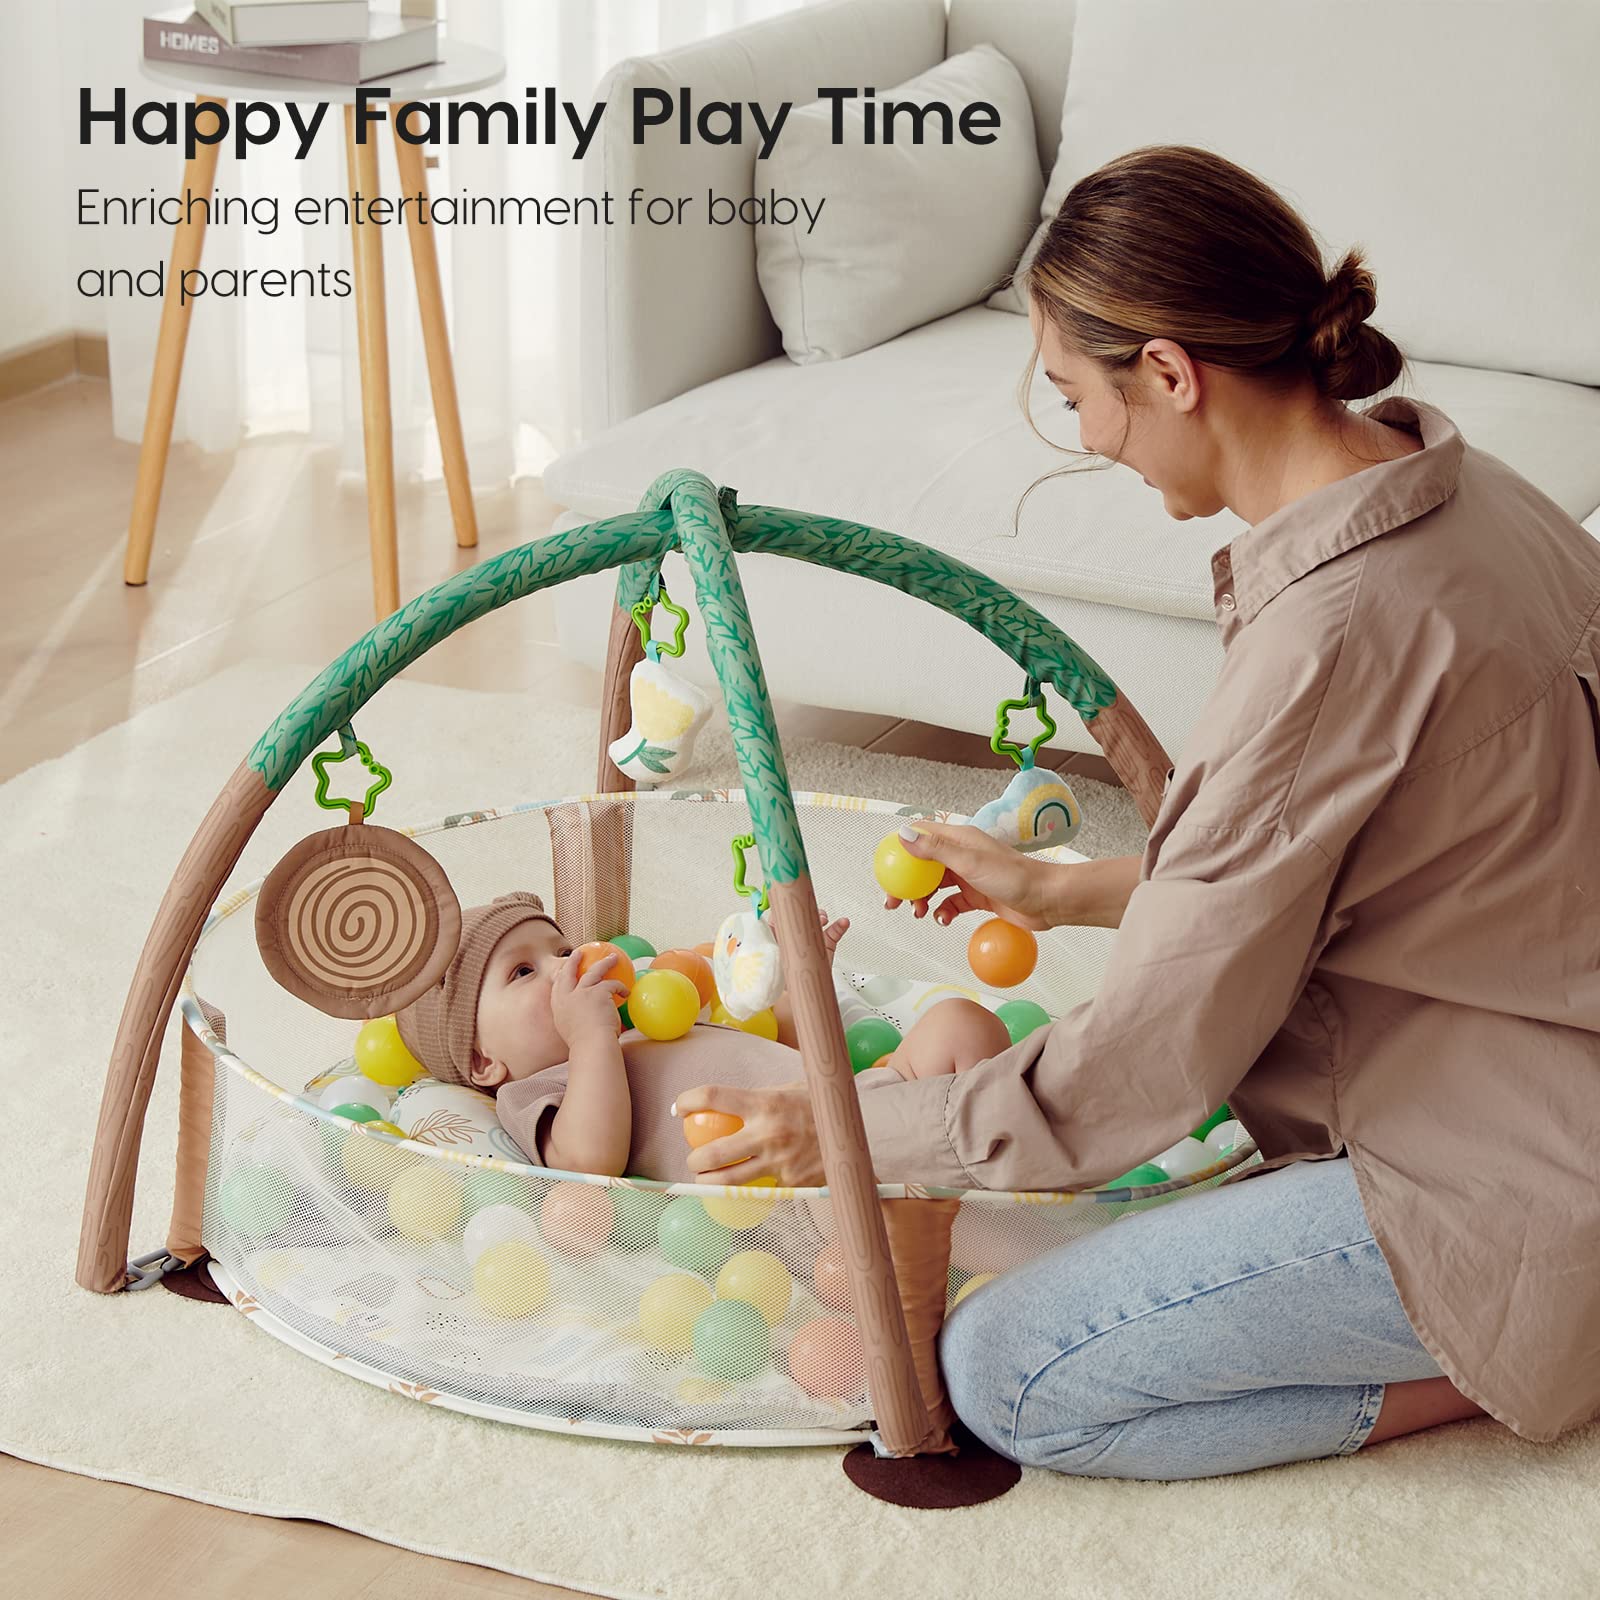 Lupantte 4-in-1 Baby Play Gym, Activity Gym Ball Pit with Detachable Anti-Slip Thickening Tummy Time Mat with Sensory Toys for Newborn Infant Toddler to Develop Motor&Cognition,Include 40 Balls